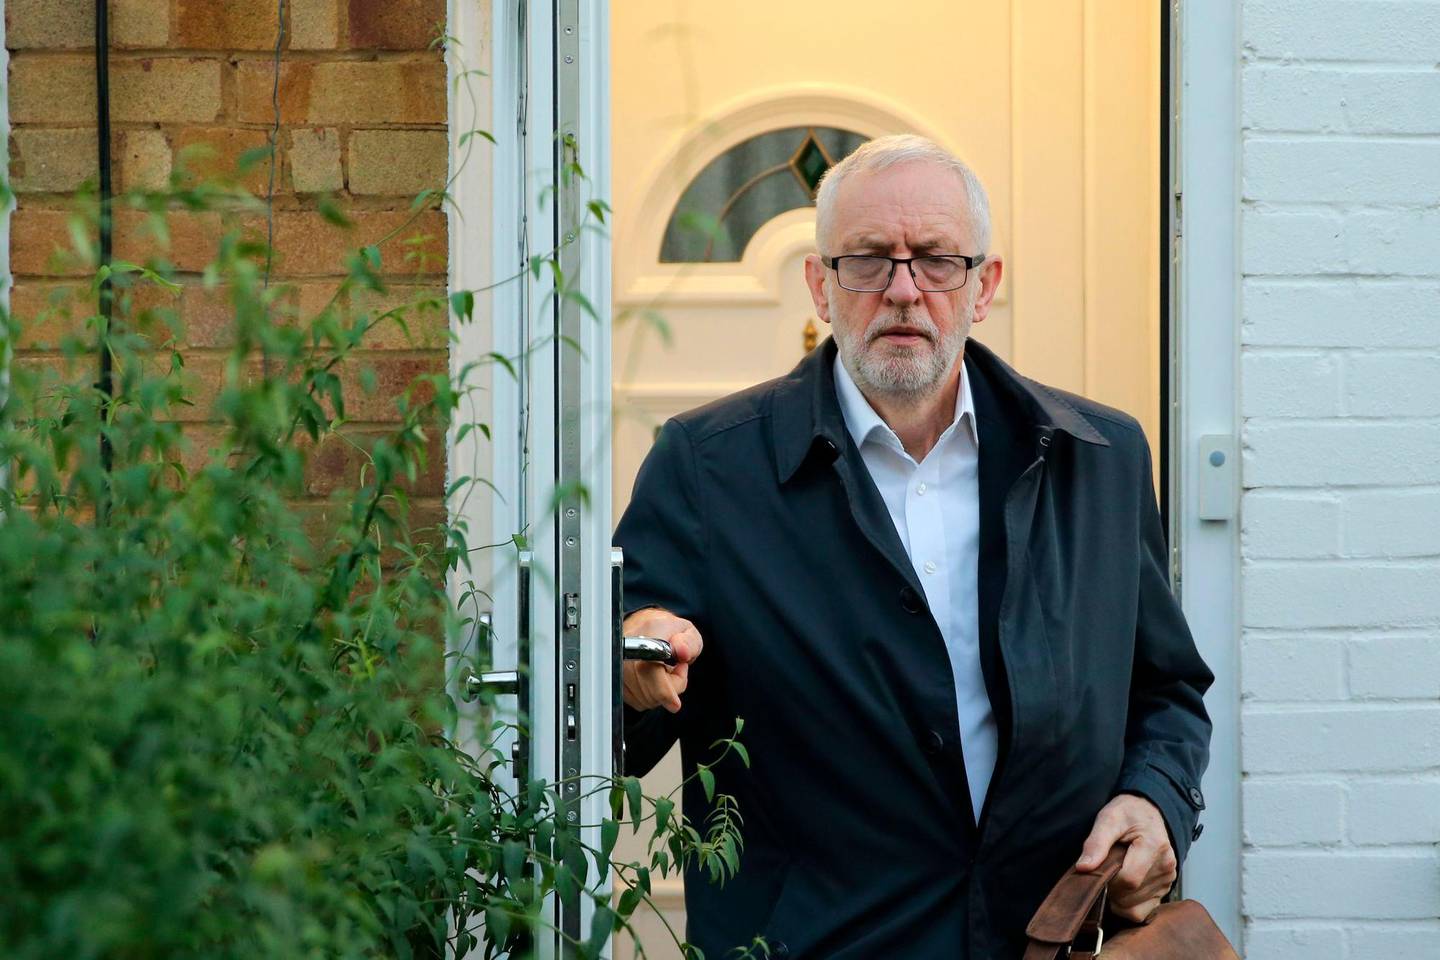 Britain's main opposition Labour Party leader Jeremy Corbyn leaves his home in London on October 19, 2019. - British MPs gather on October 19 for a historic vote on the government's Brexit deal, a decision that could see the UK leave the EU this month or plunge the country into fresh uncertainty. (Photo by ISABEL INFANTES / AFP)